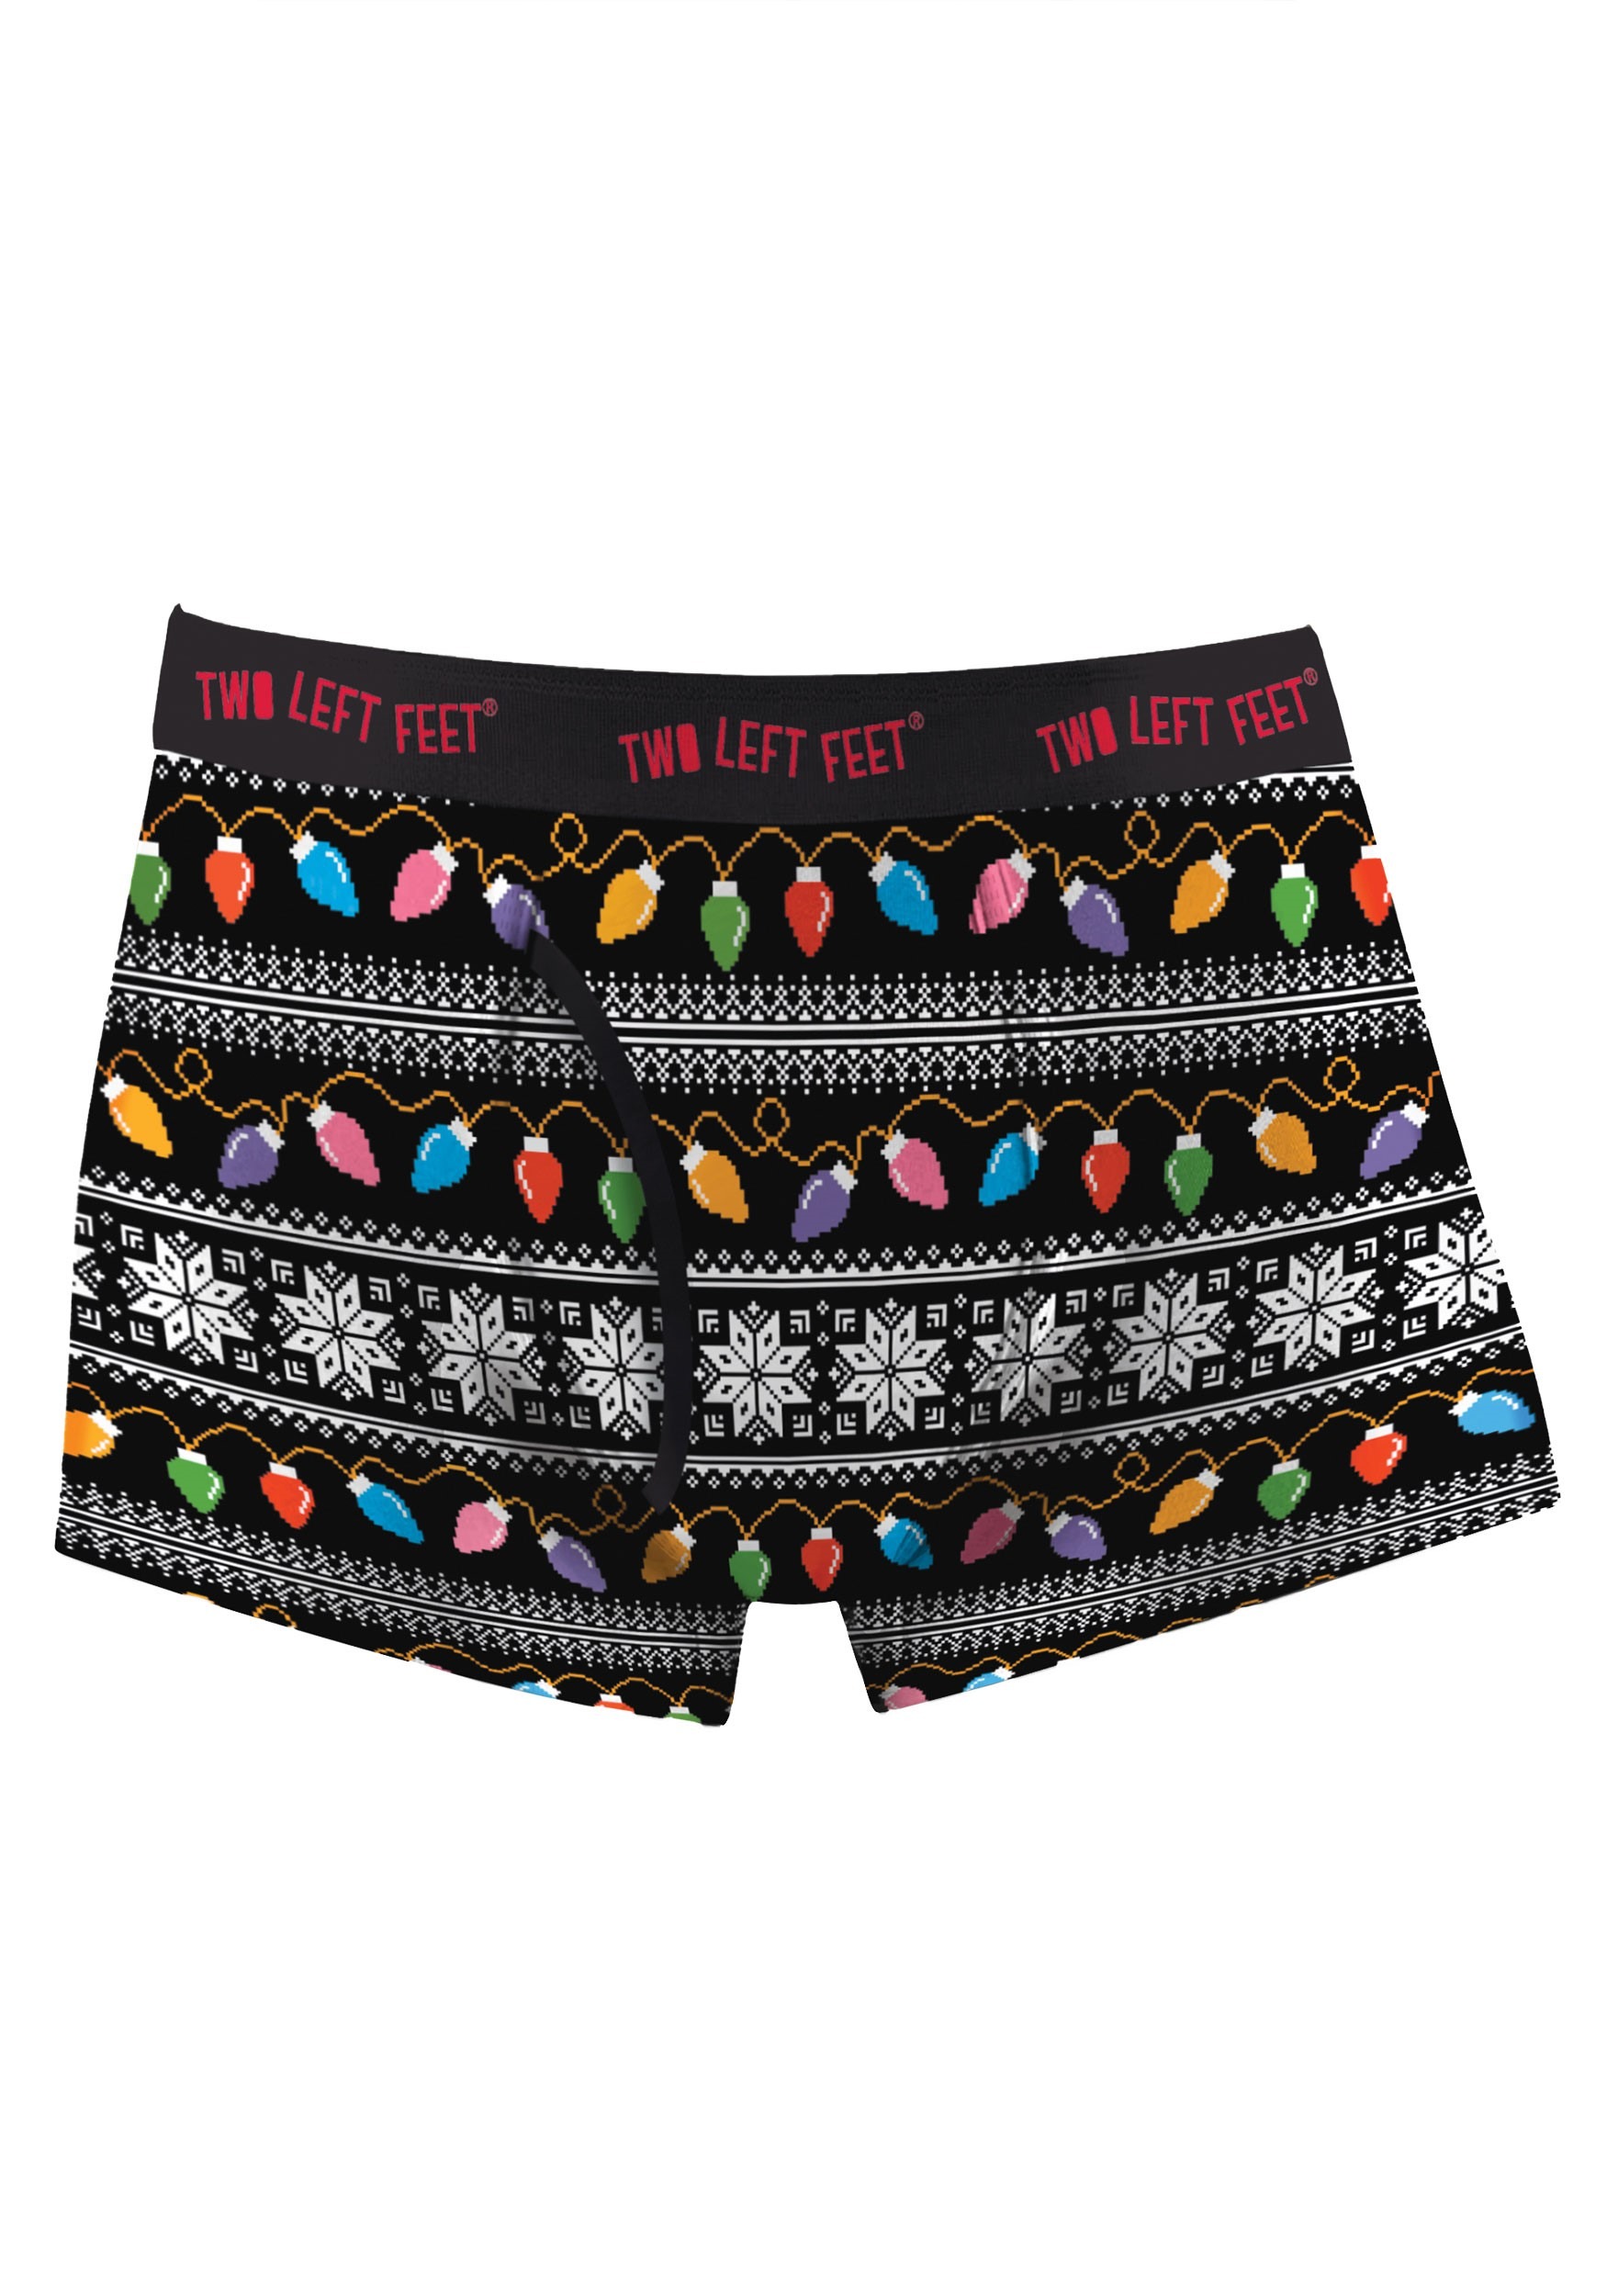 Christmas Lights Mens Trunk Boxer Brief Underwear Two Left Feet All Lit Up